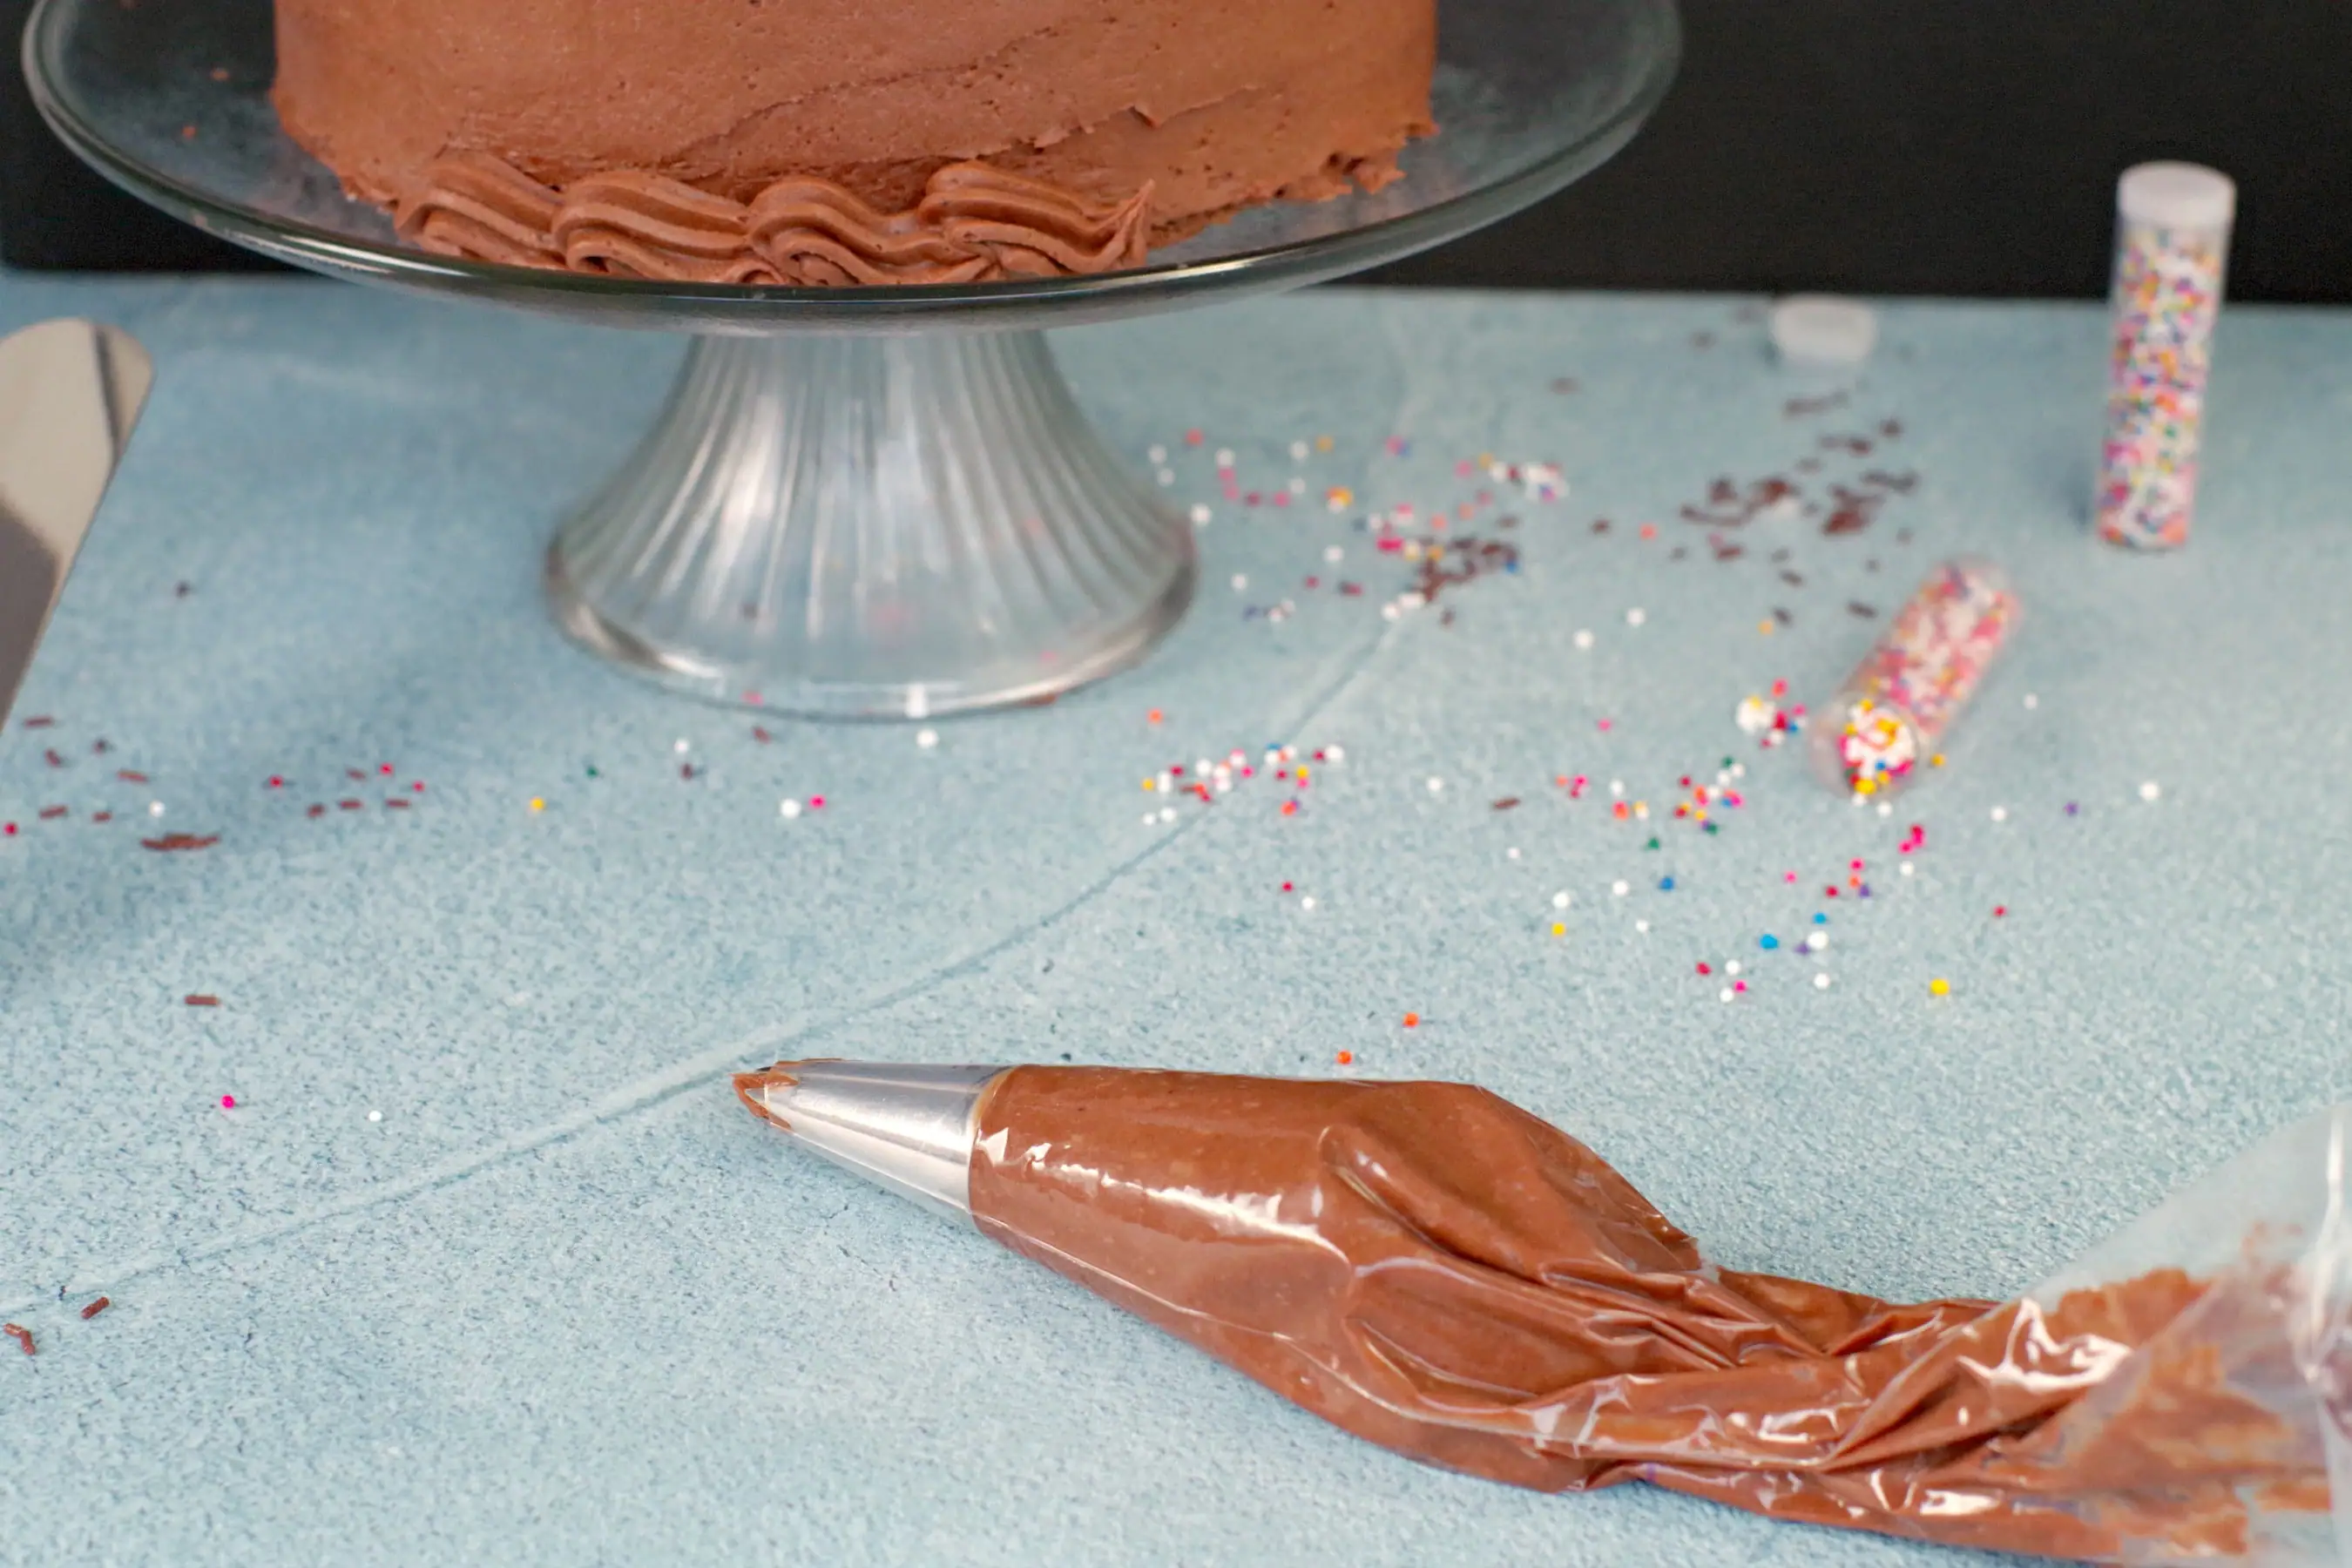 Chocolate frosting in pastry bag with partially decorated cake in the background